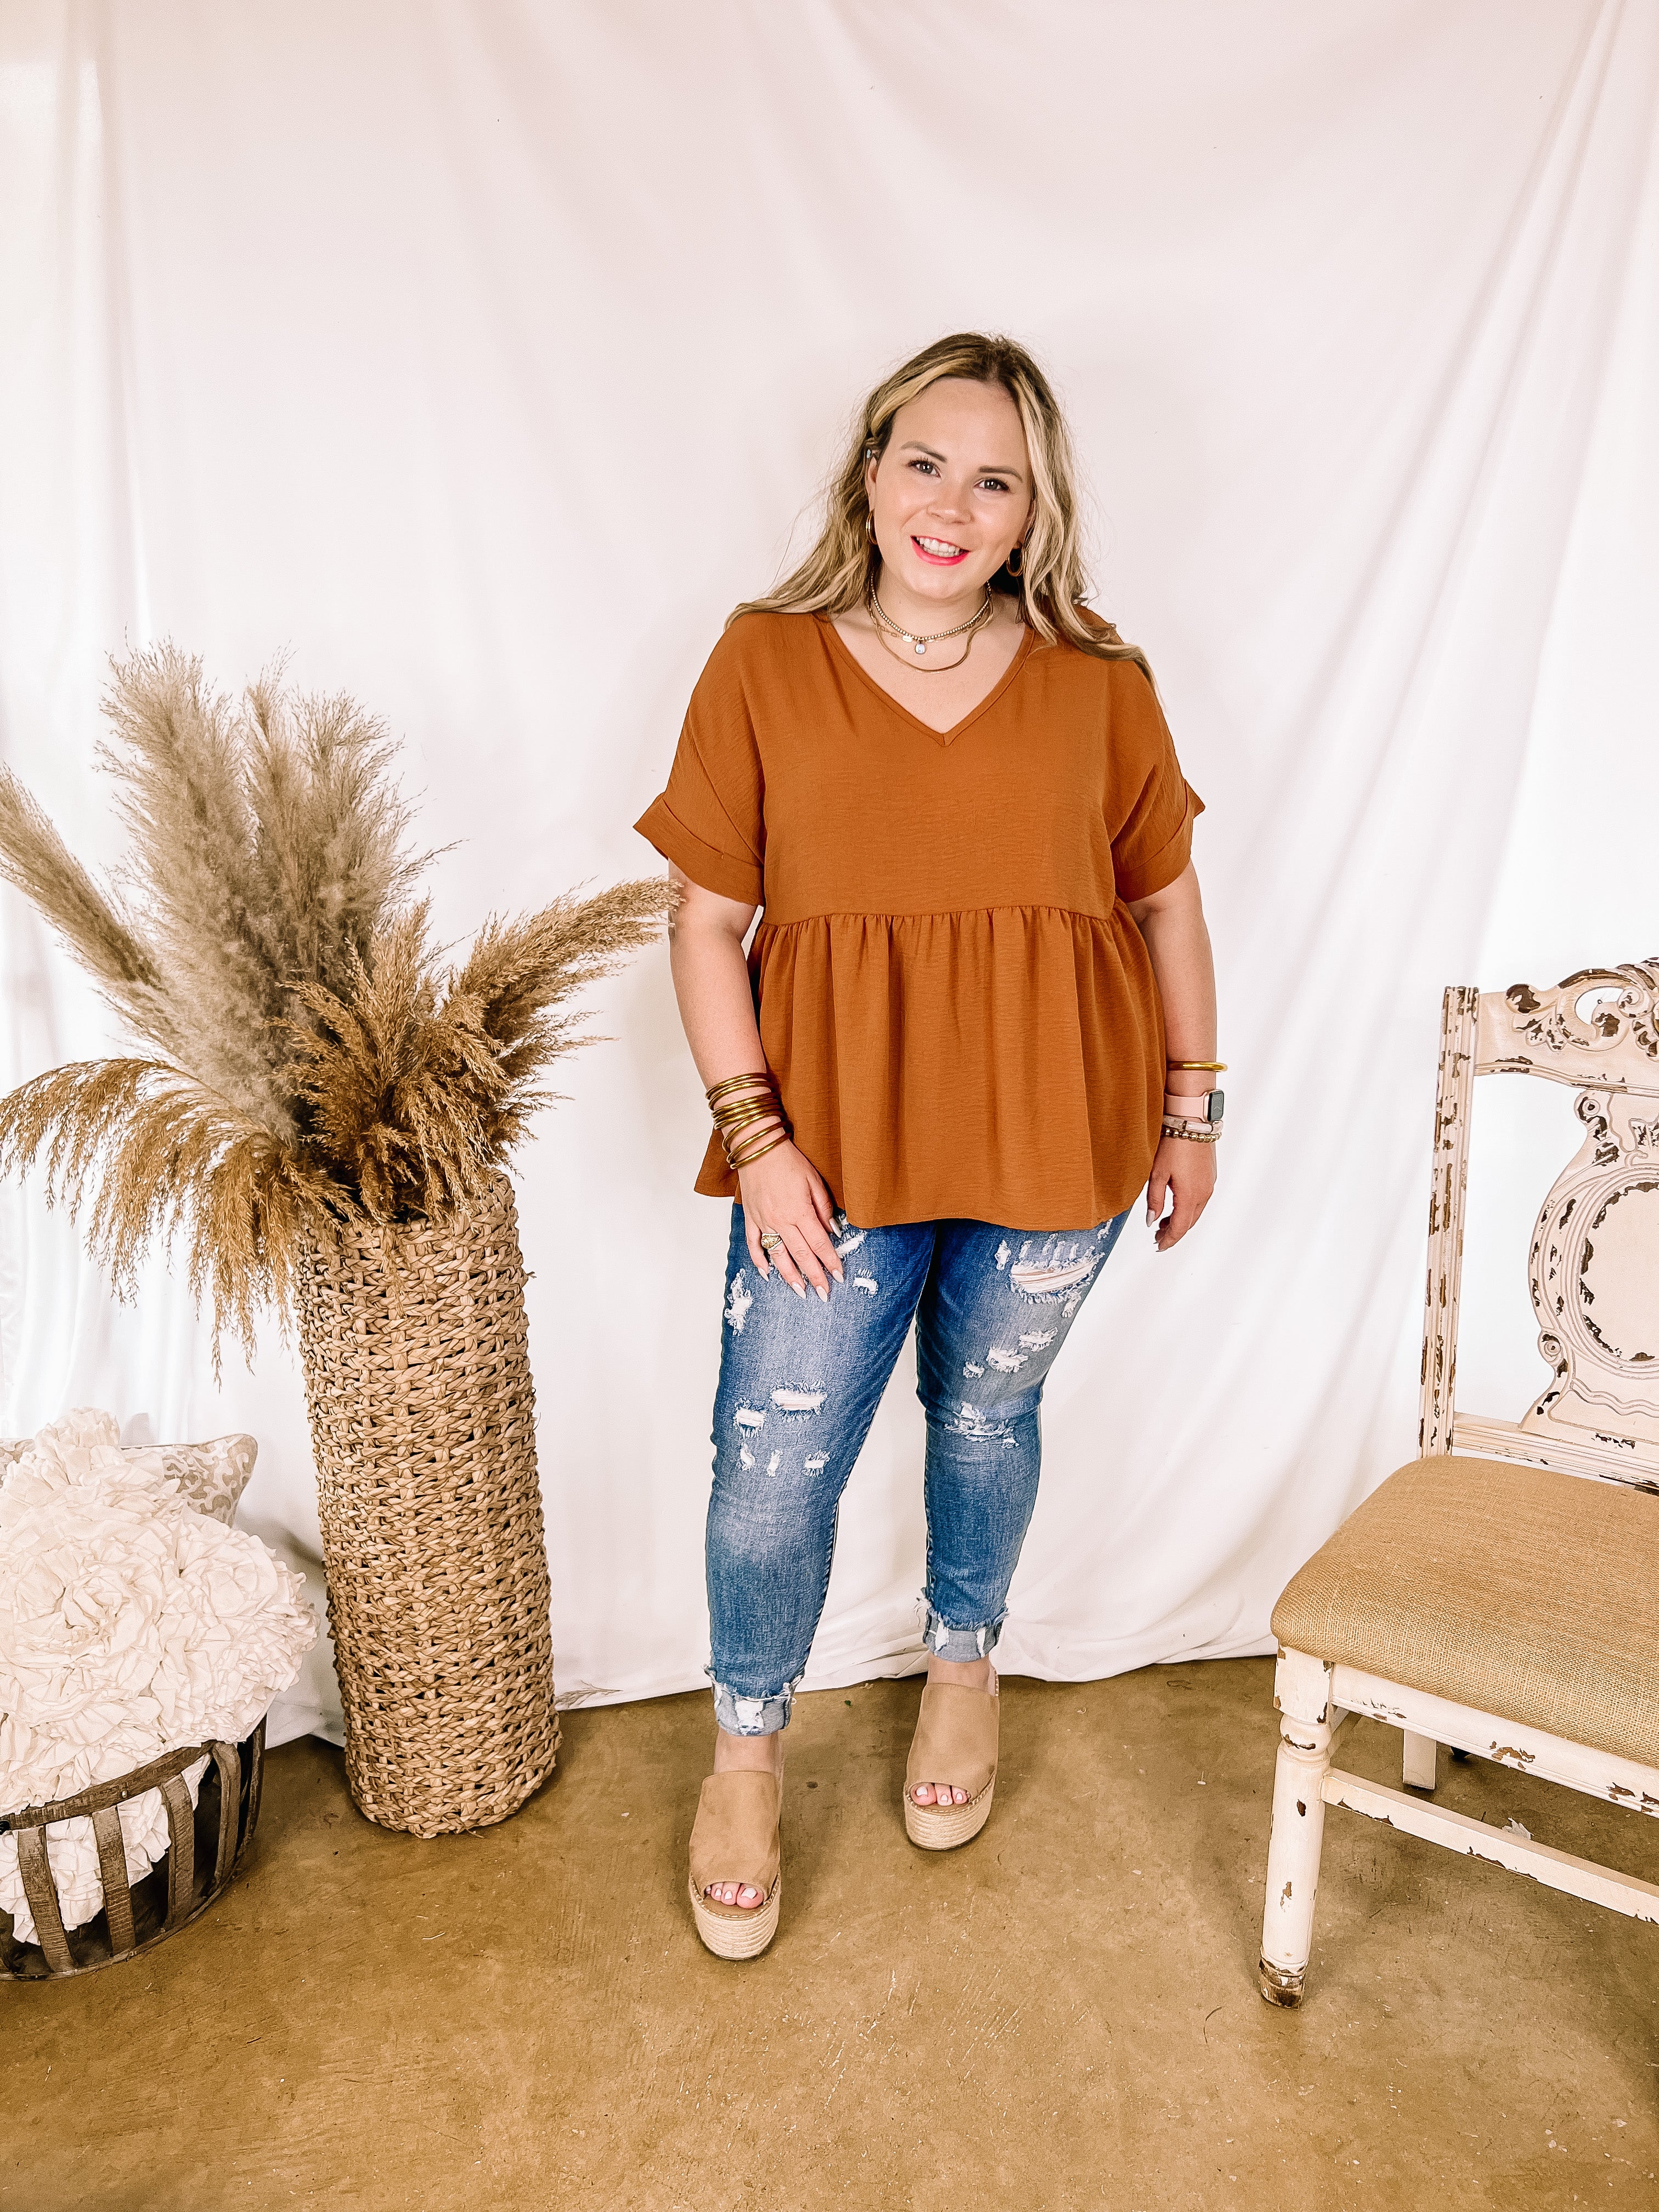 Touring the City Short Sleeve V Neck Babydoll Top in Rust Orange - Giddy Up Glamour Boutique